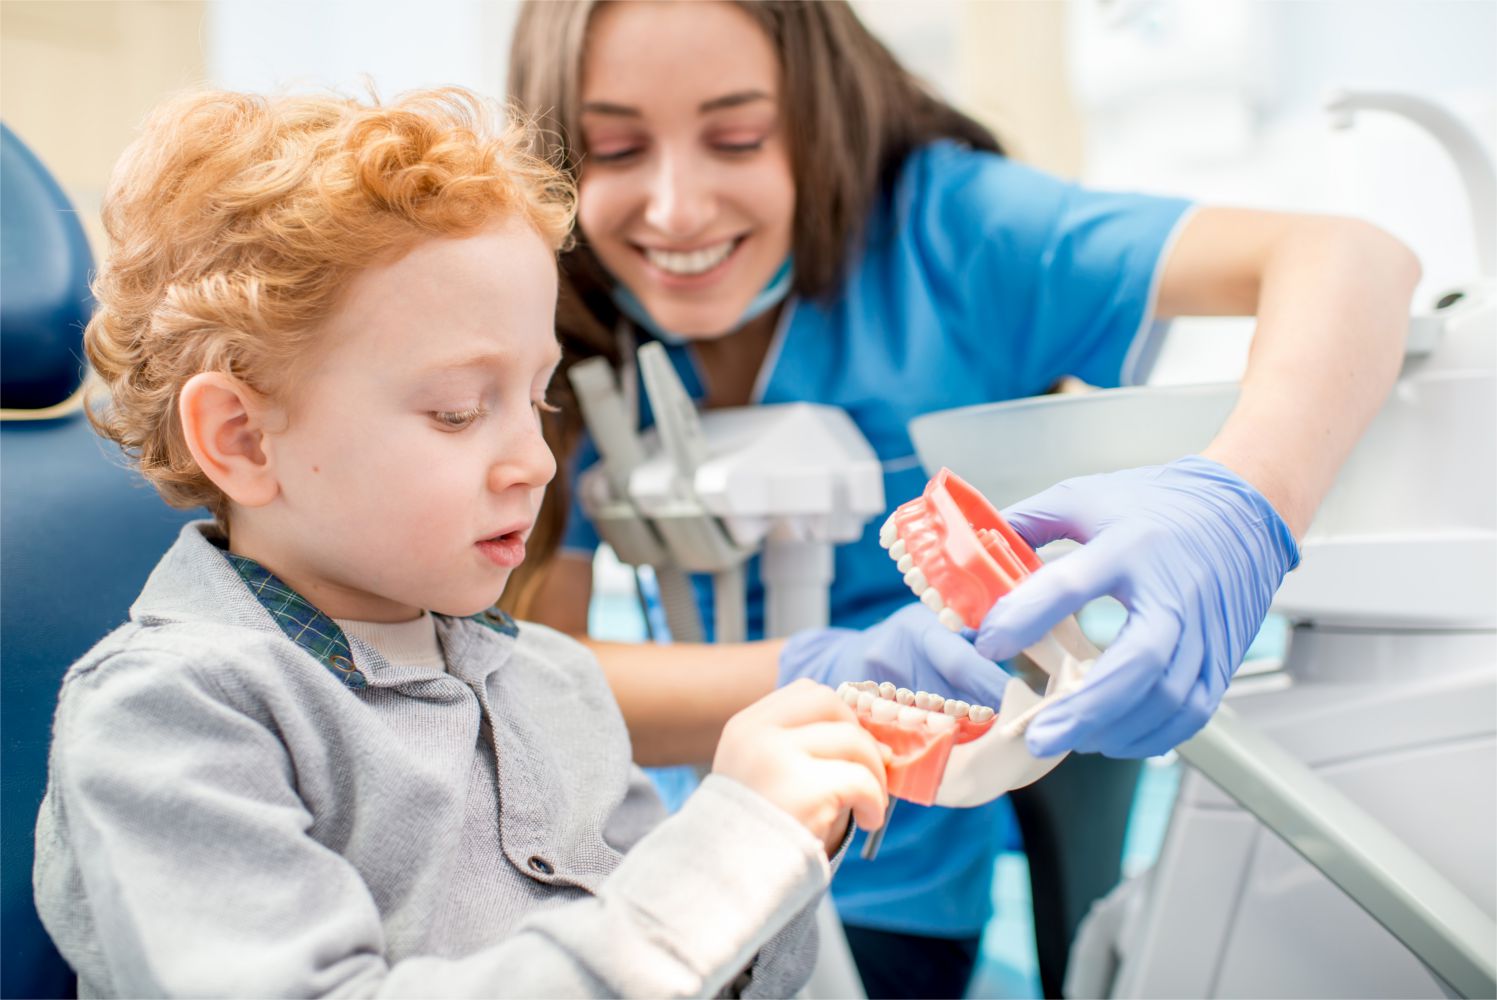 Dental care services with Children's Dentistry of Cherry Creek